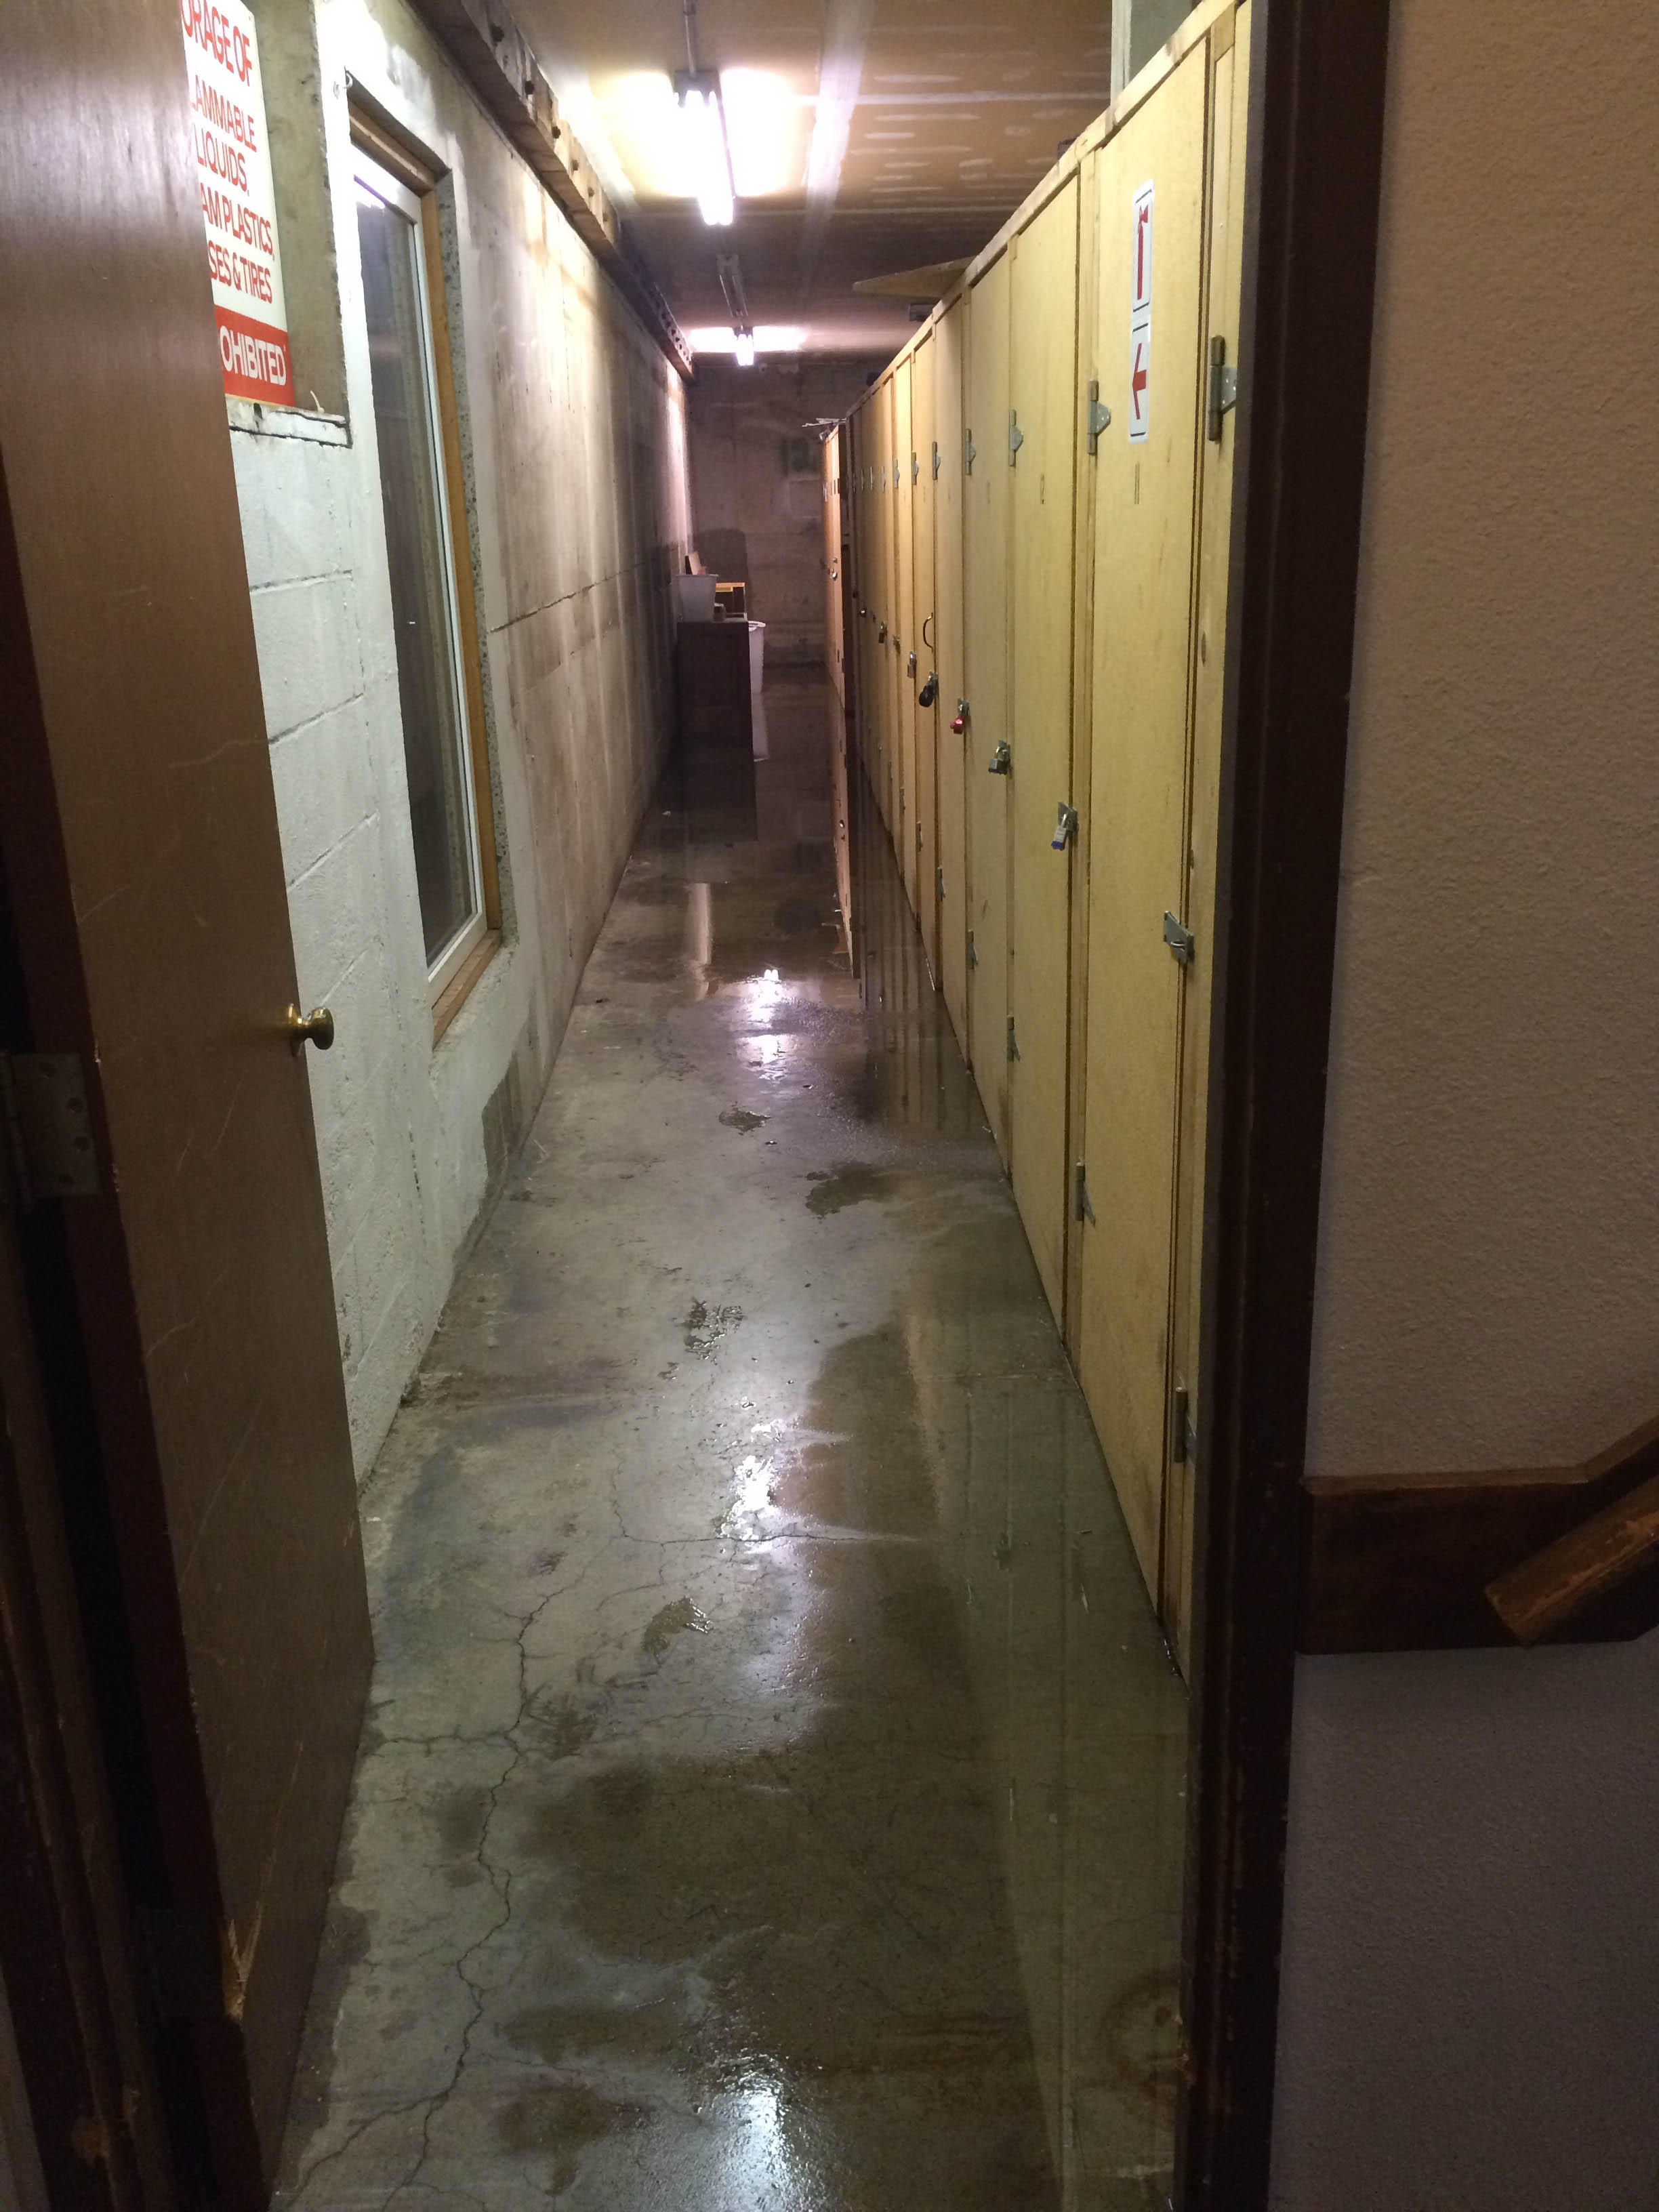 Basement storage in Renton had a water leak. They called our team here at SERVPRO of Renton for water damage clean up.